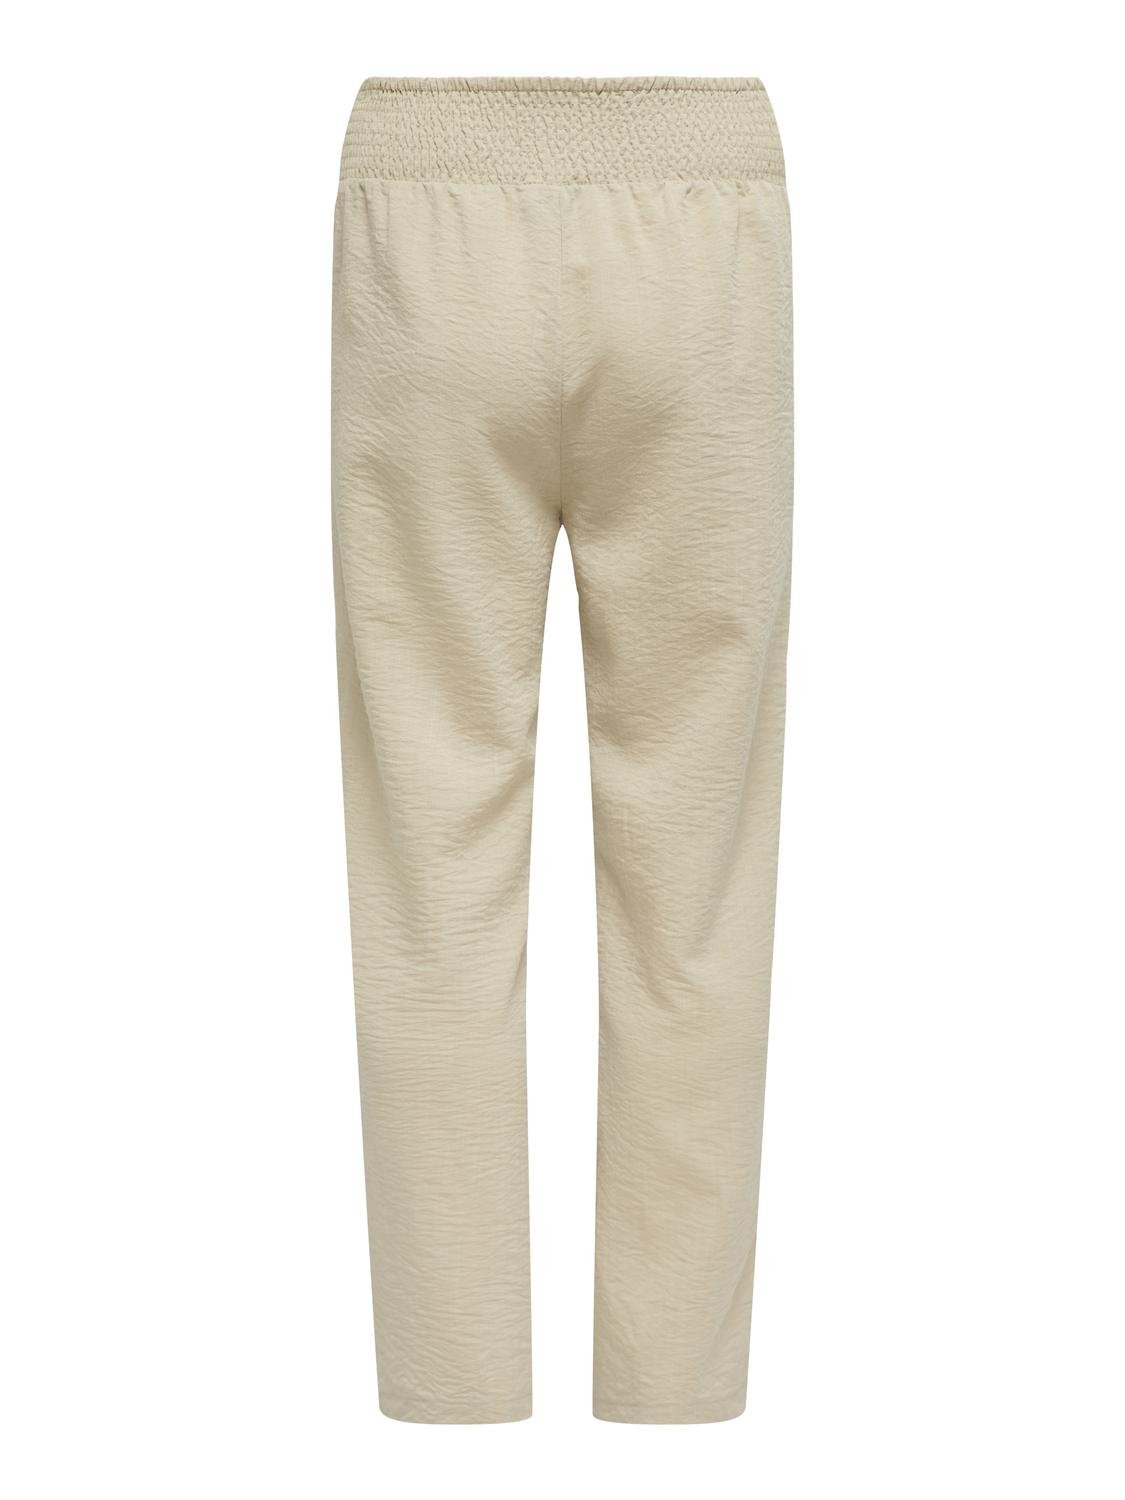 ONLY Mama trousers with mid waist -Safari - 15305692